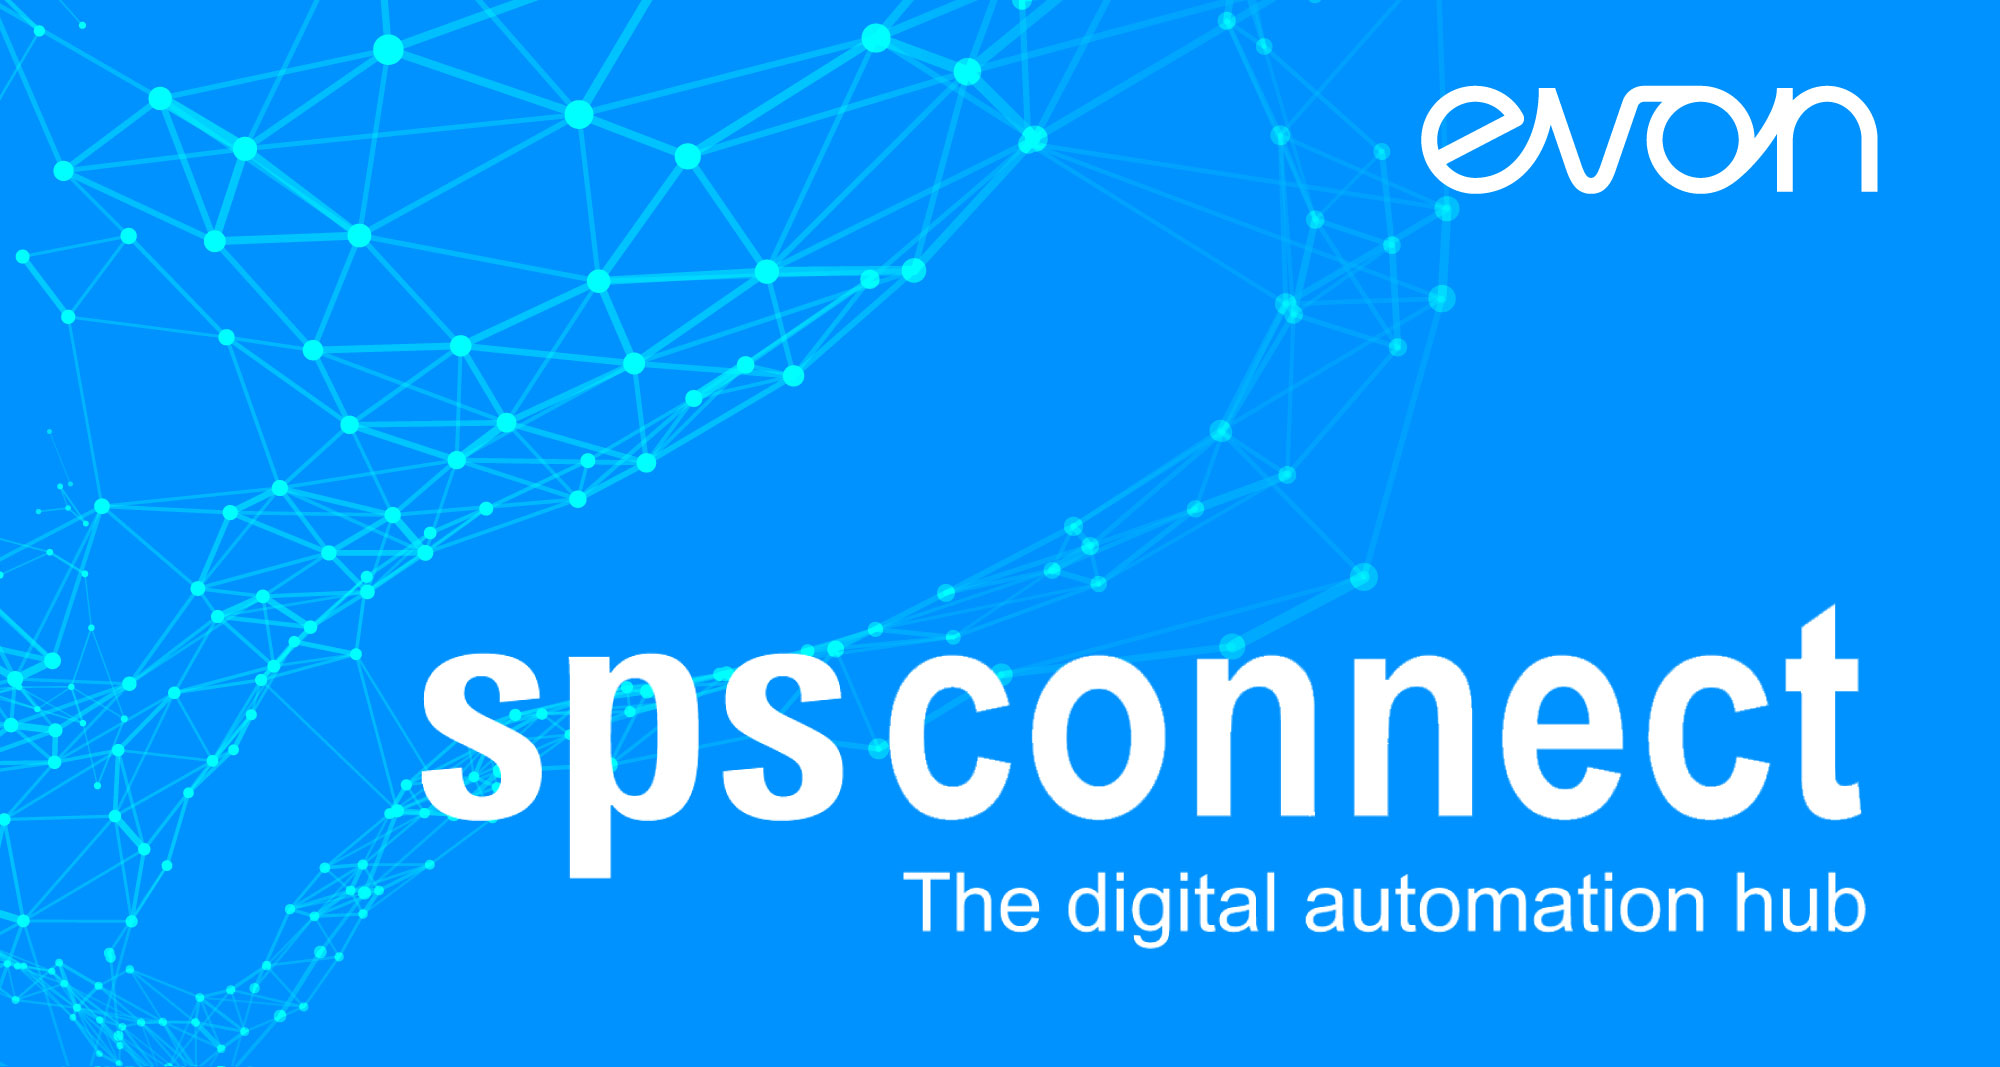 SPS Connect